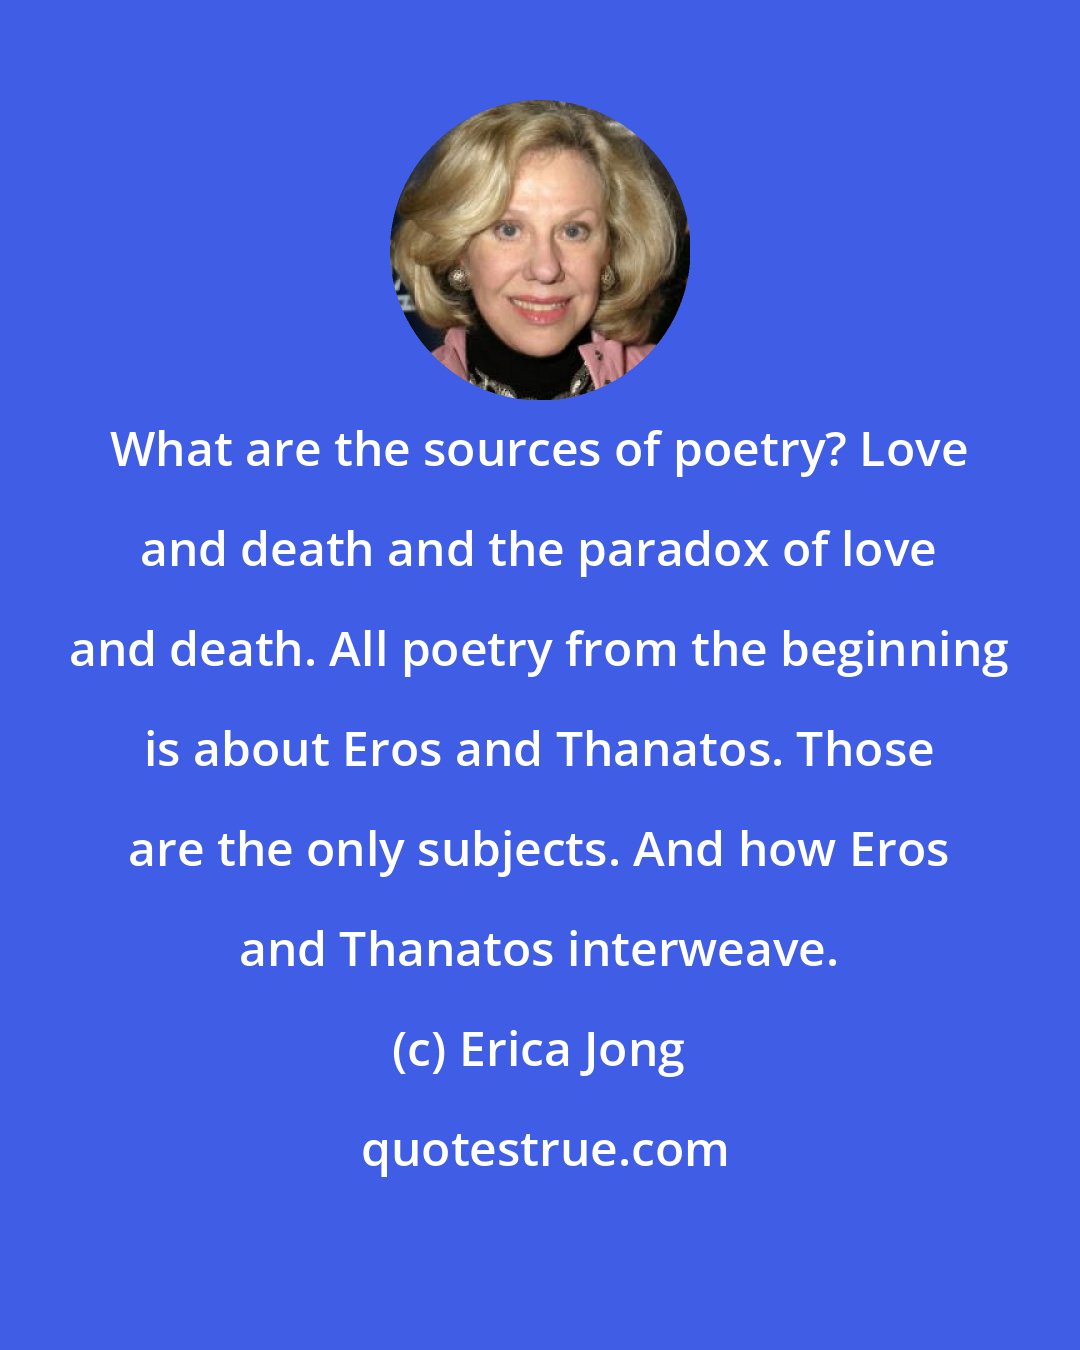 Erica Jong: What are the sources of poetry? Love and death and the paradox of love and death. All poetry from the beginning is about Eros and Thanatos. Those are the only subjects. And how Eros and Thanatos interweave.